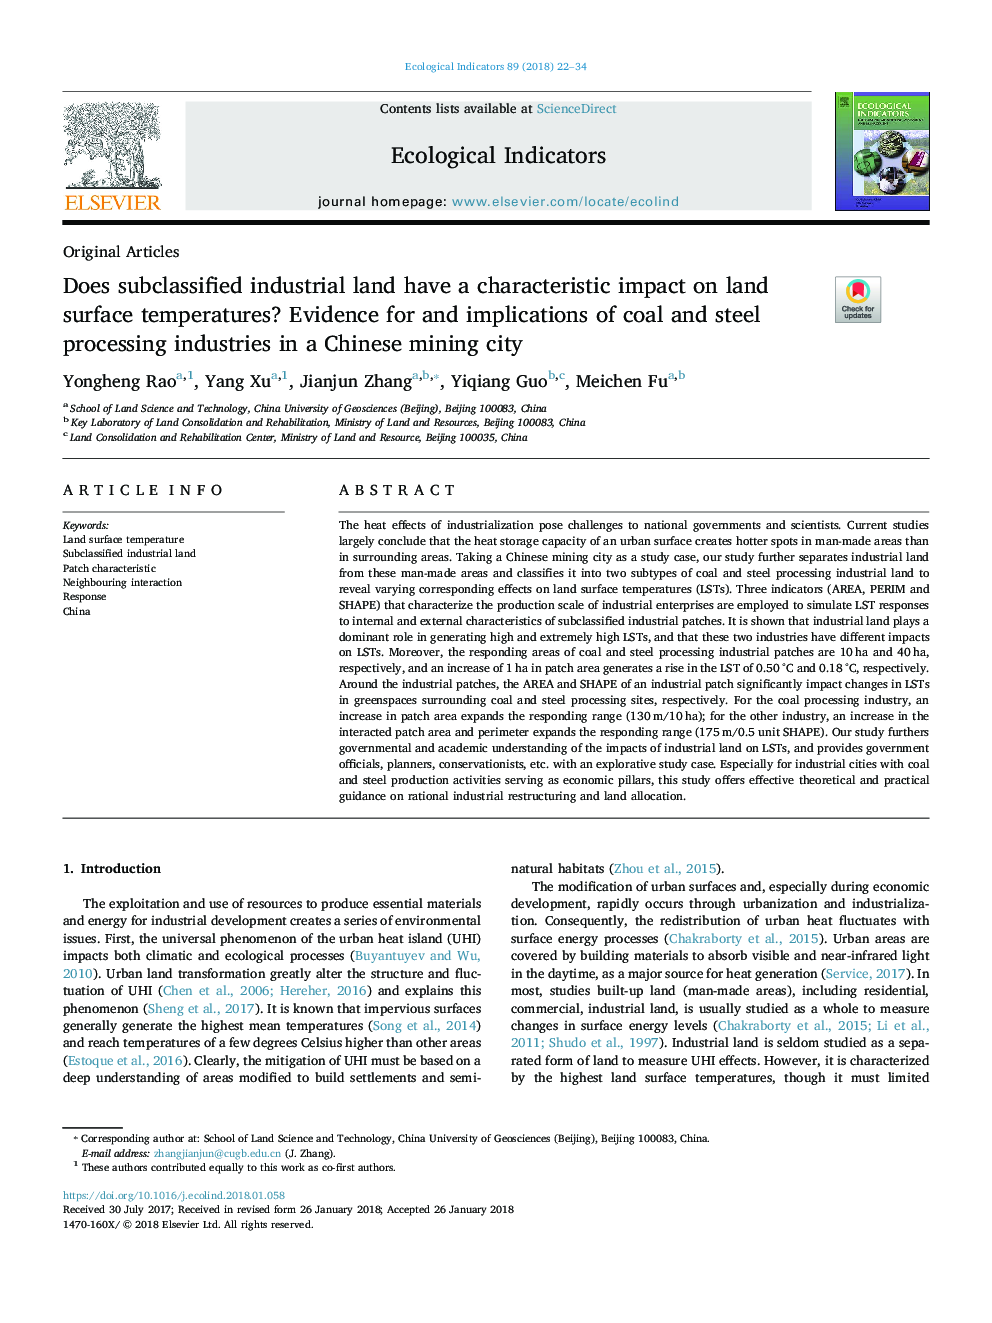 Does subclassified industrial land have a characteristic impact on land surface temperatures? Evidence for and implications of coal and steel processing industries in a Chinese mining city